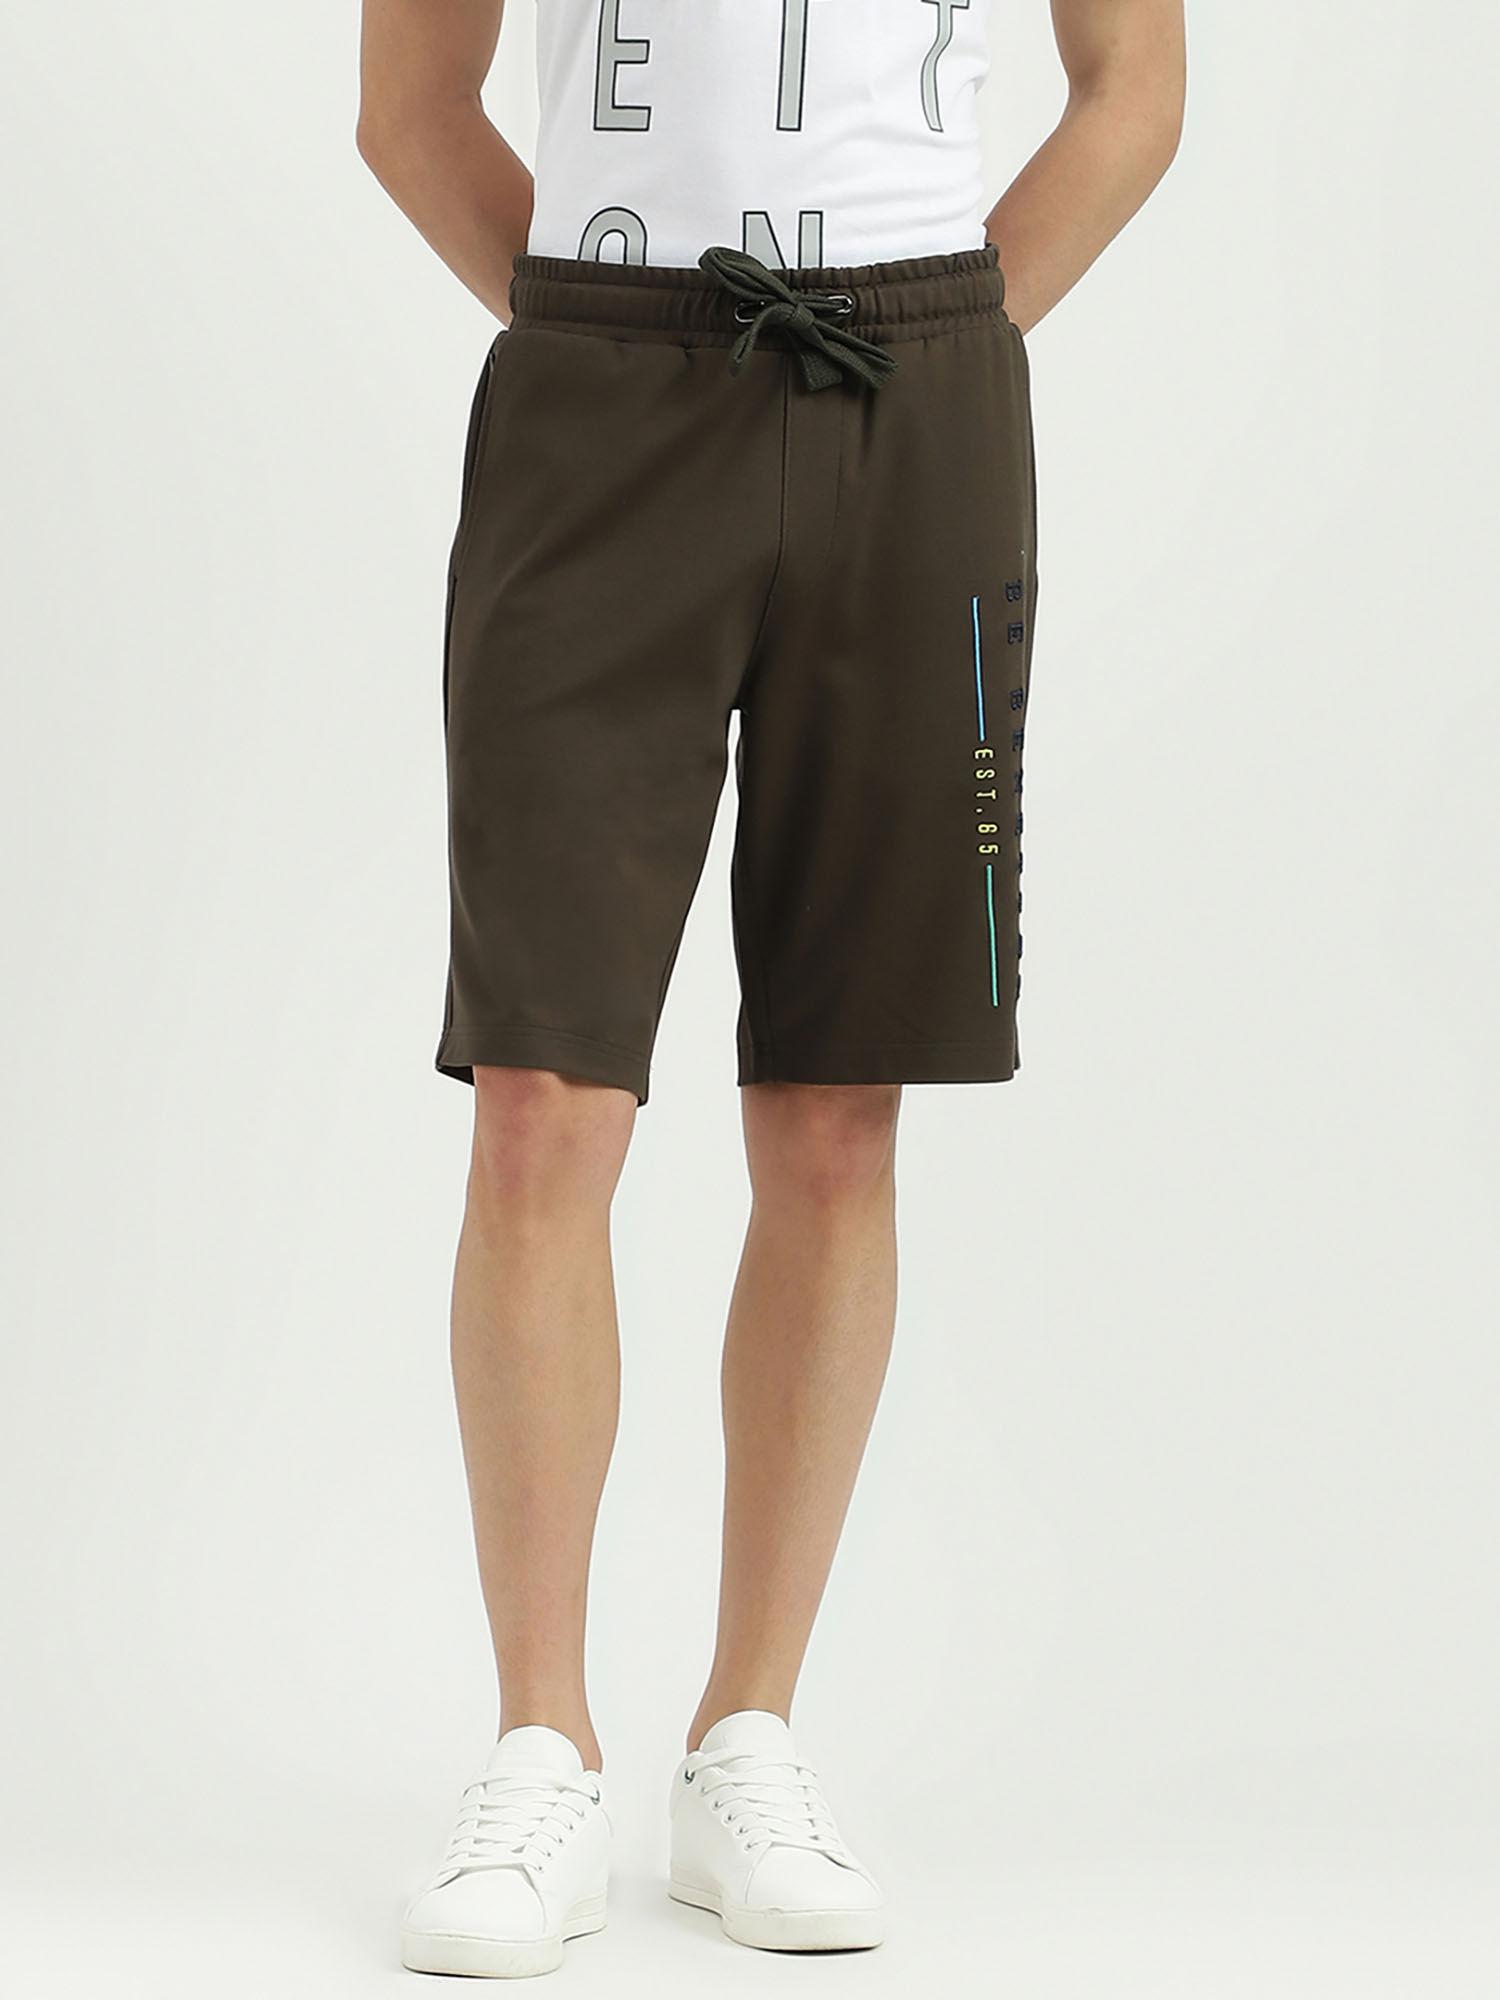 embroidered regular fit mid waist shorts